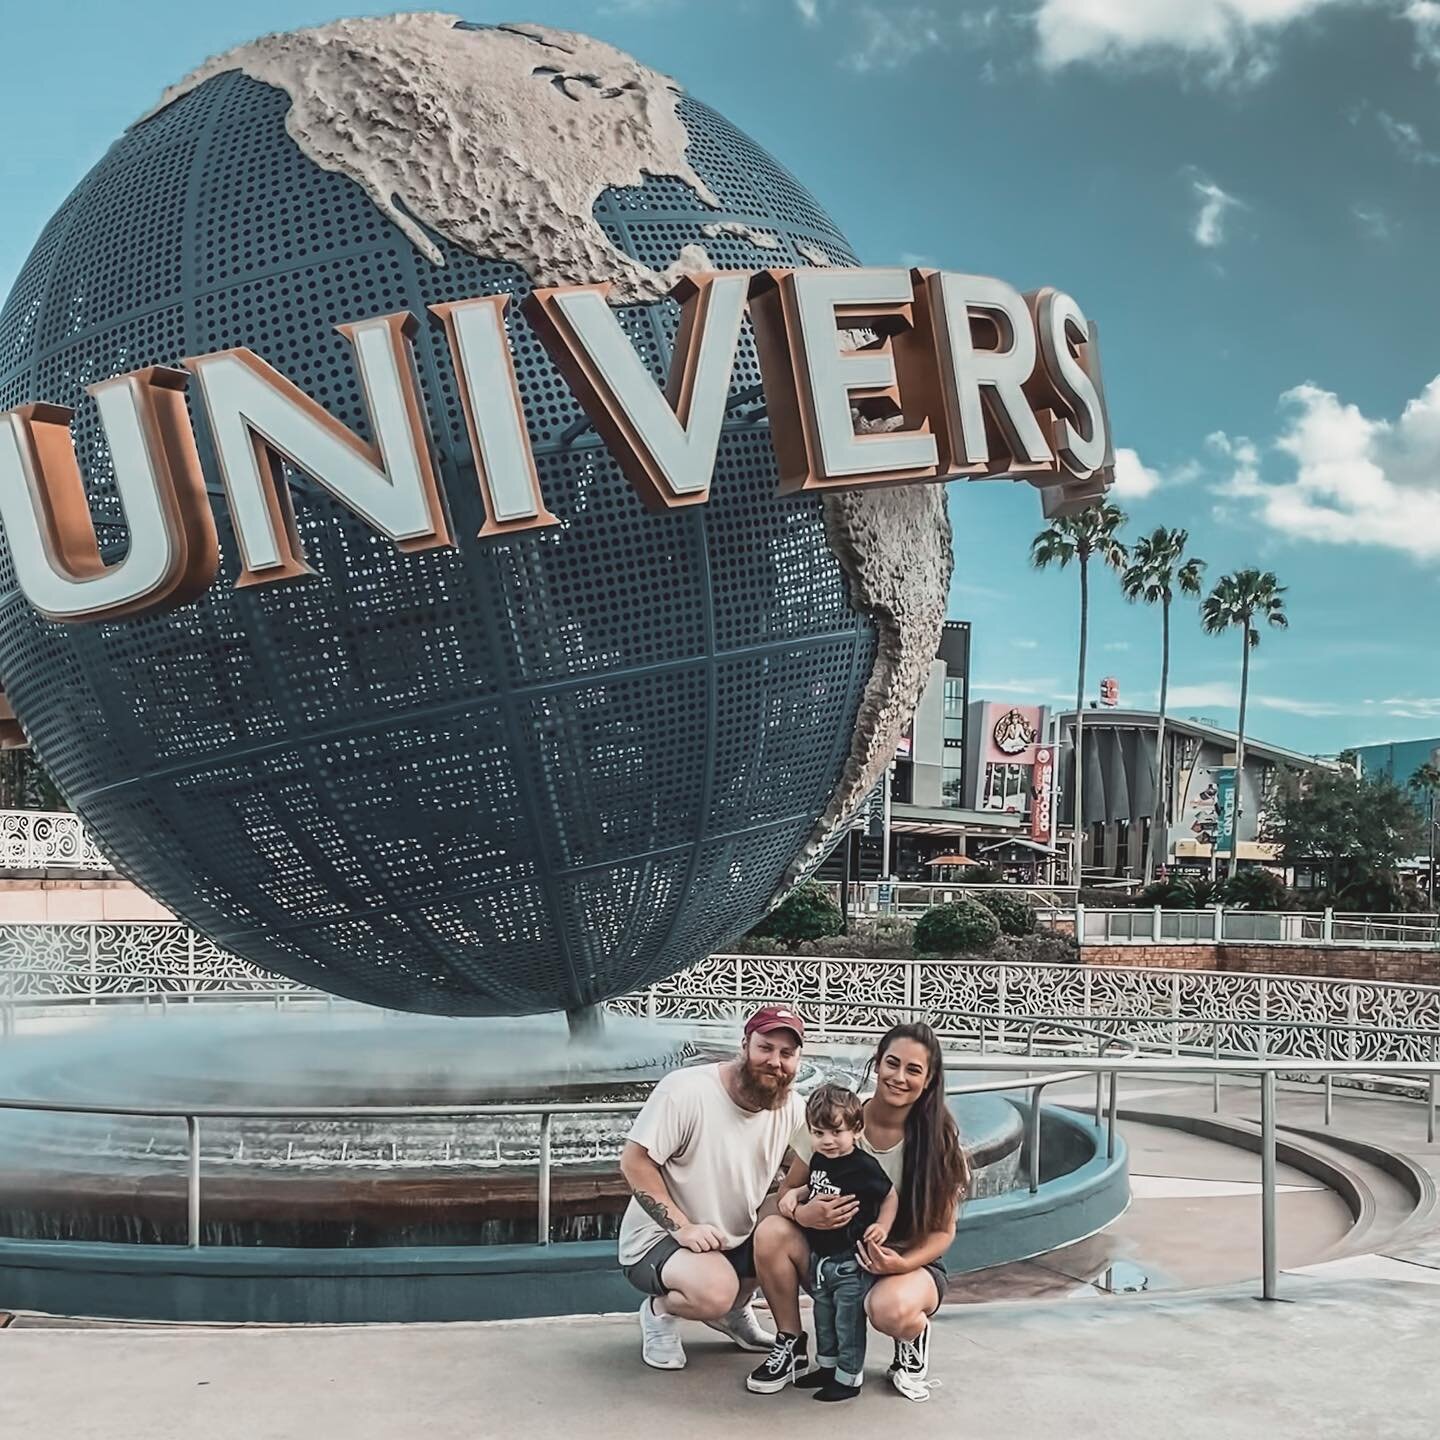 Starting this week off refreshed🤗
⠀
Yes, I start my week on Tuesdays 😂. Because Monday's are my husbands only day off and yesterday we spent it taking our littlest of 3 babies to universal for the 1st time. It was so much fun and now I&rsquo;m read